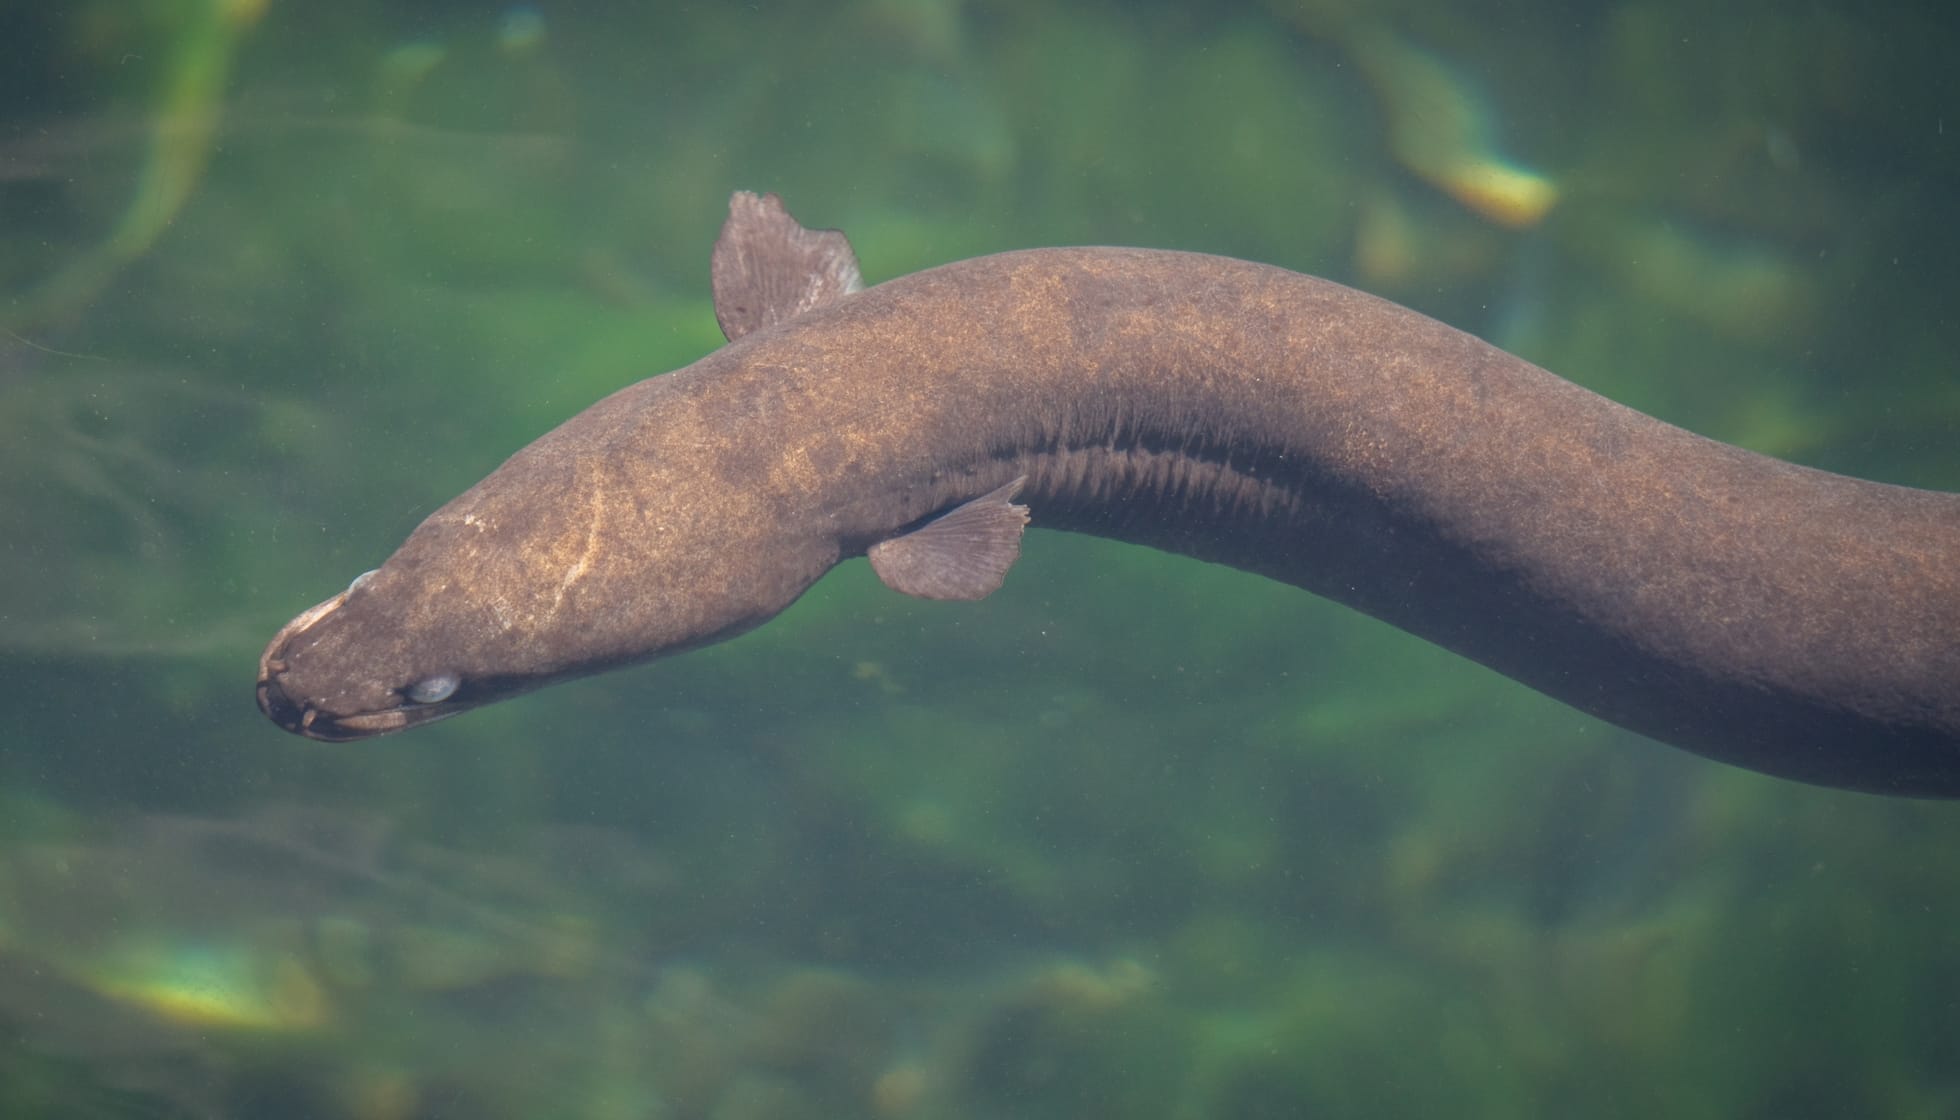 Did you know… Shortfin eels can live up to 60 years?